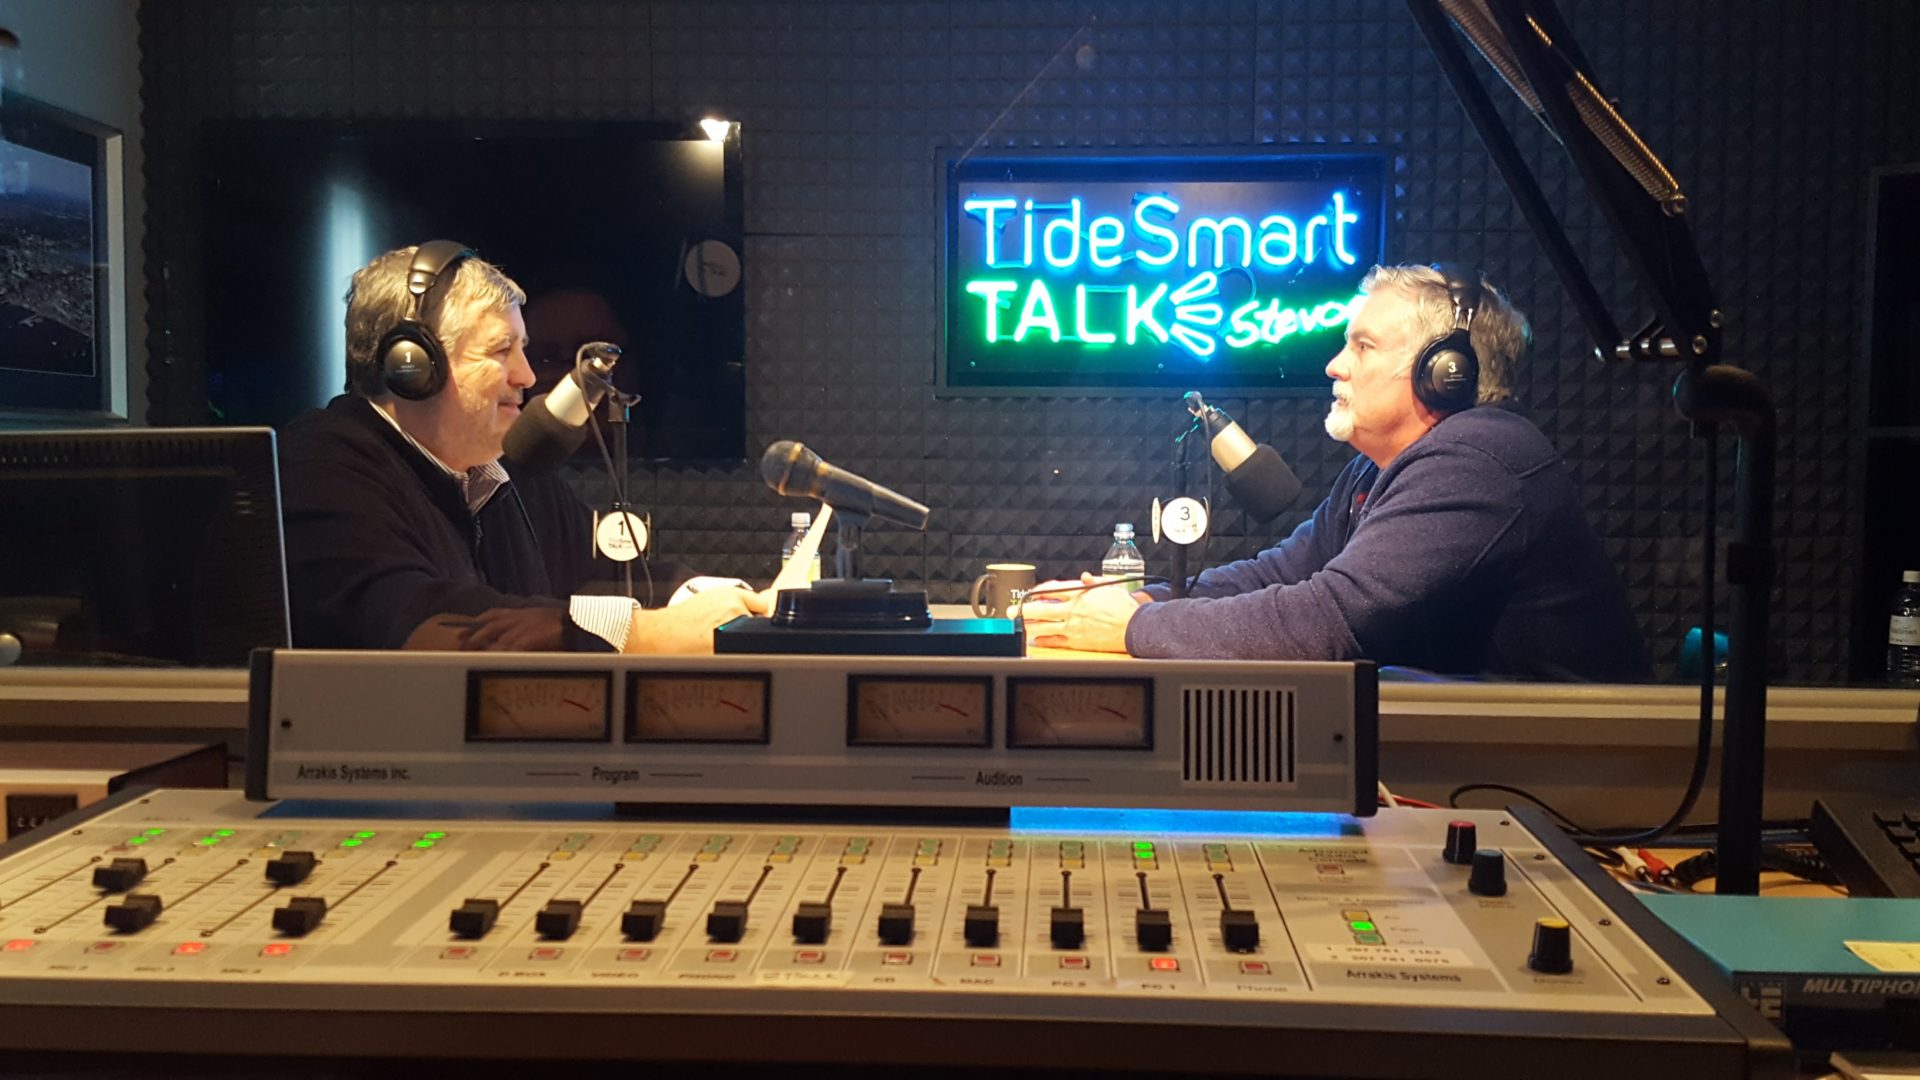 Host of TideSmart Talk with Stevoe, Steve Woods, welcomed Executive Director of Preble Street, Mark Swann (Swannie) (at right).